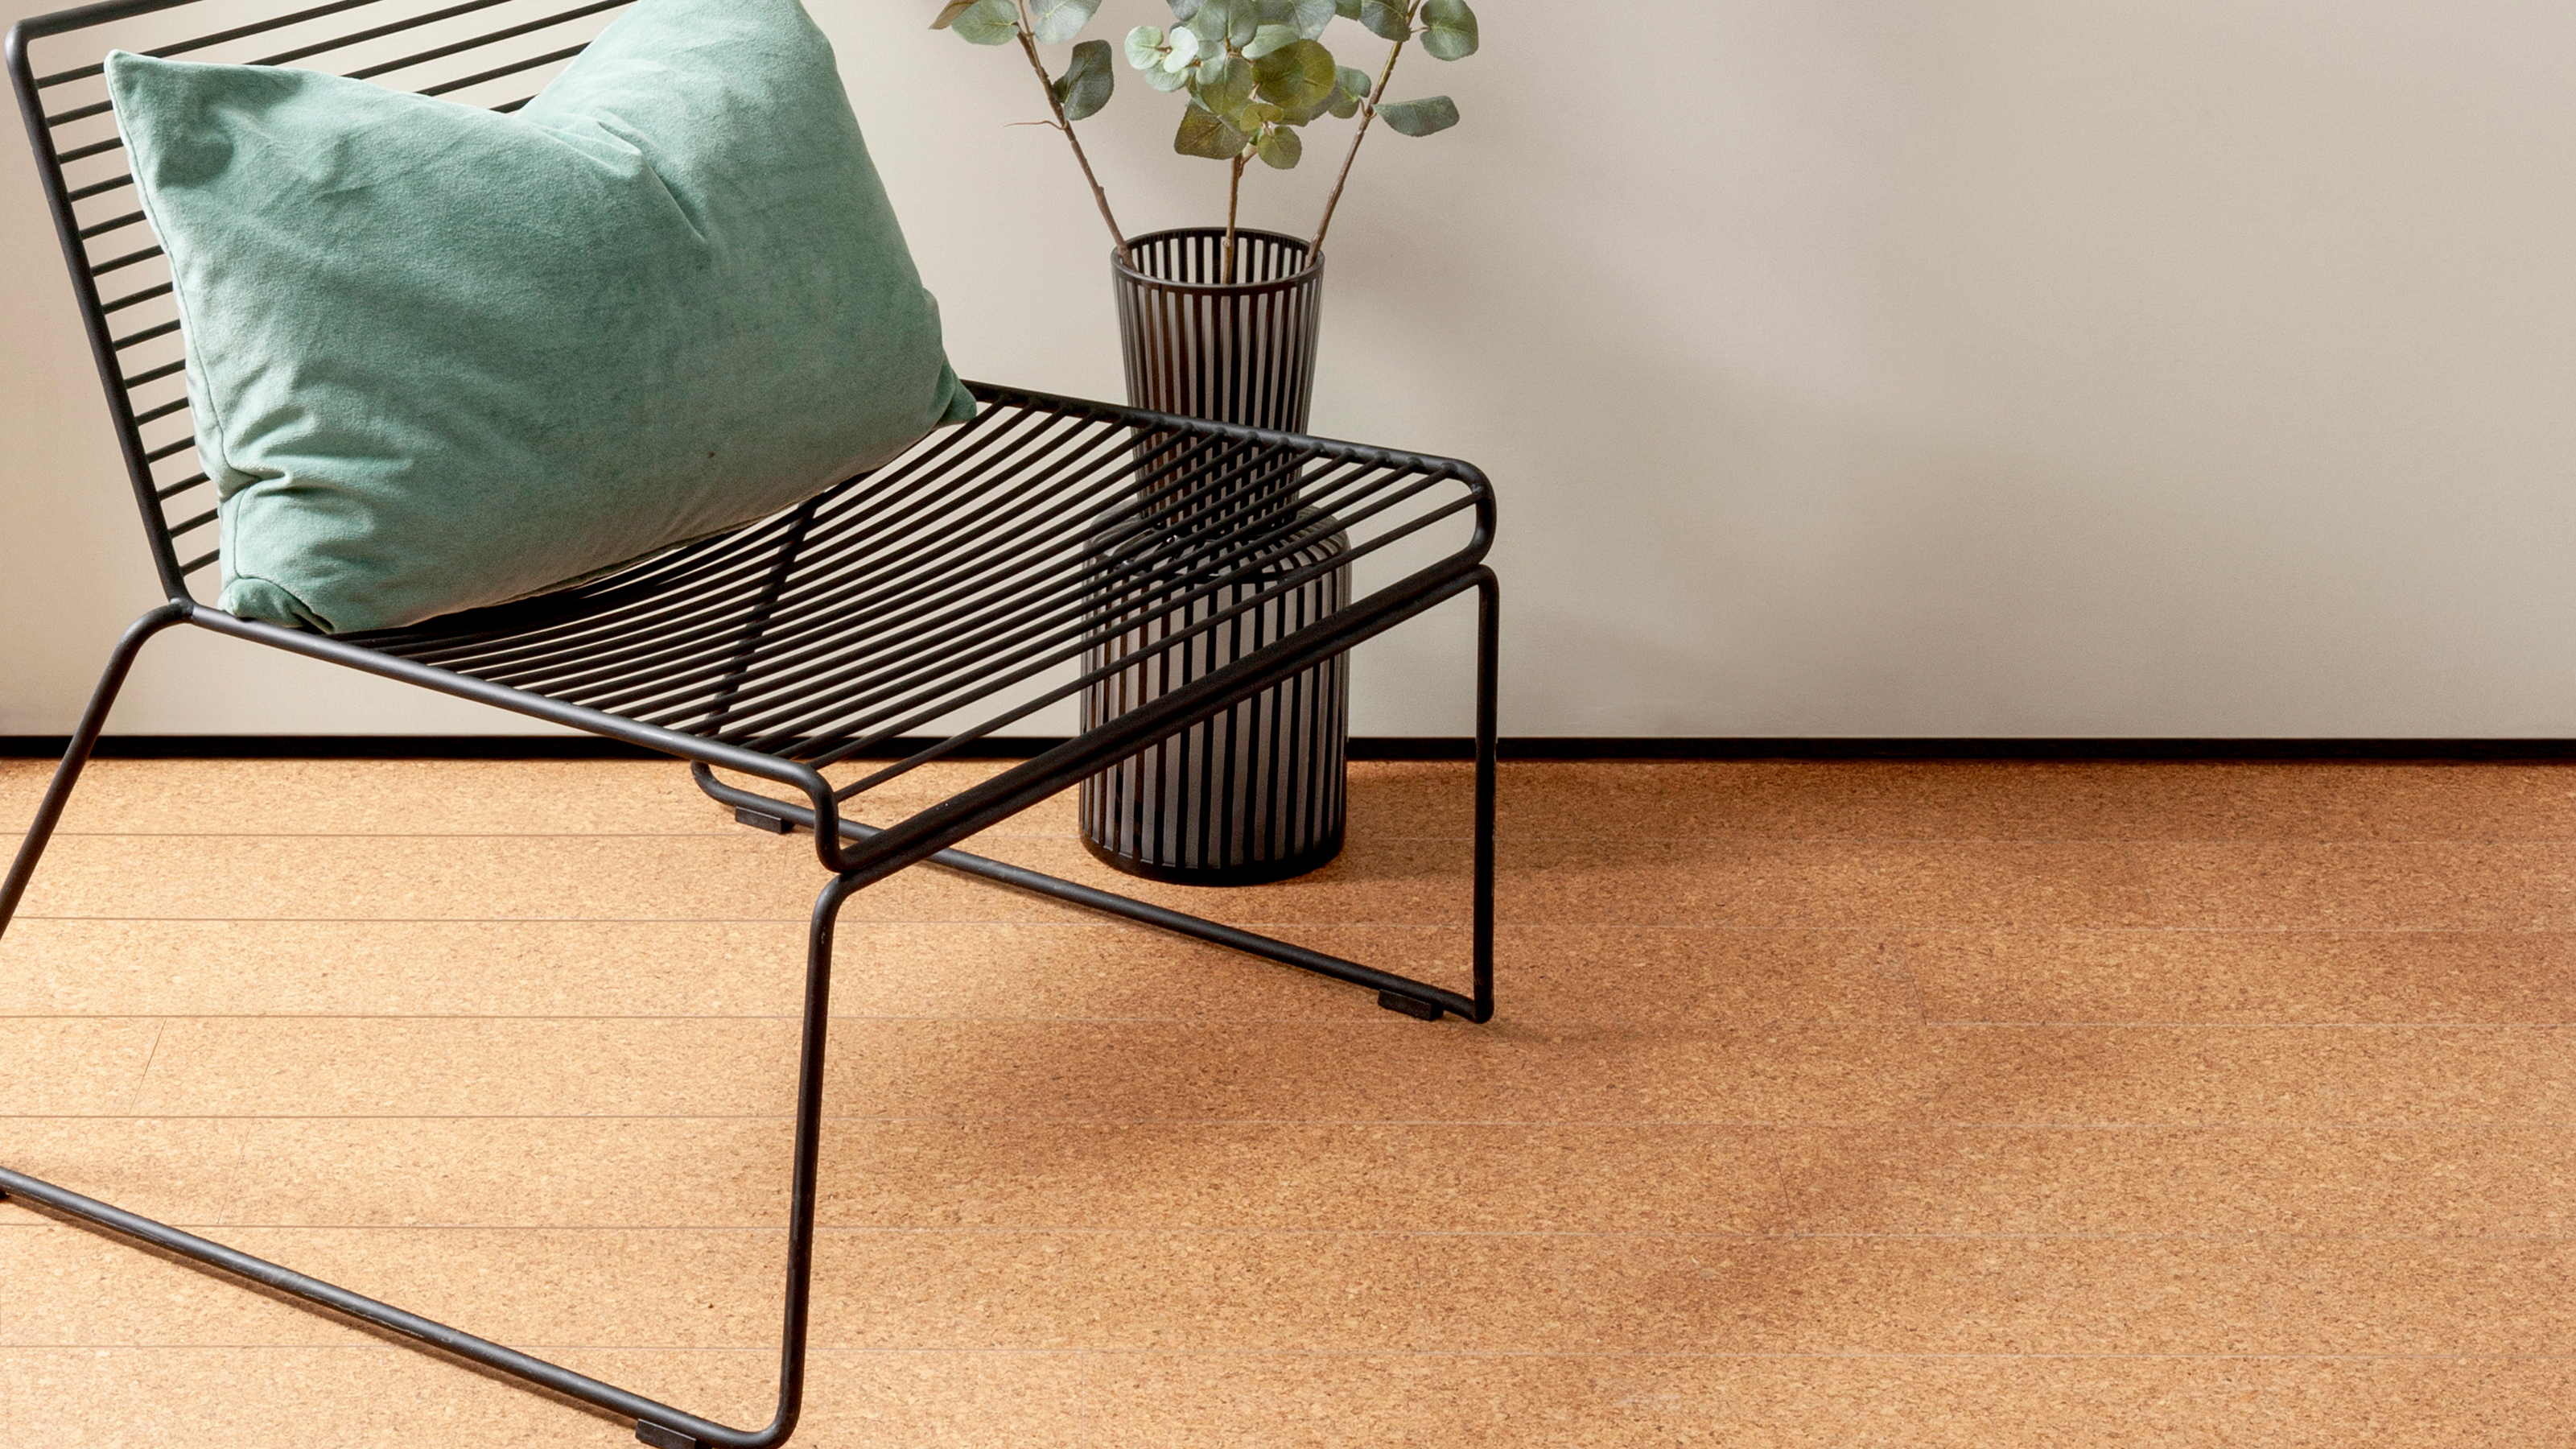 Cork Flooring Review: Pros and Cons